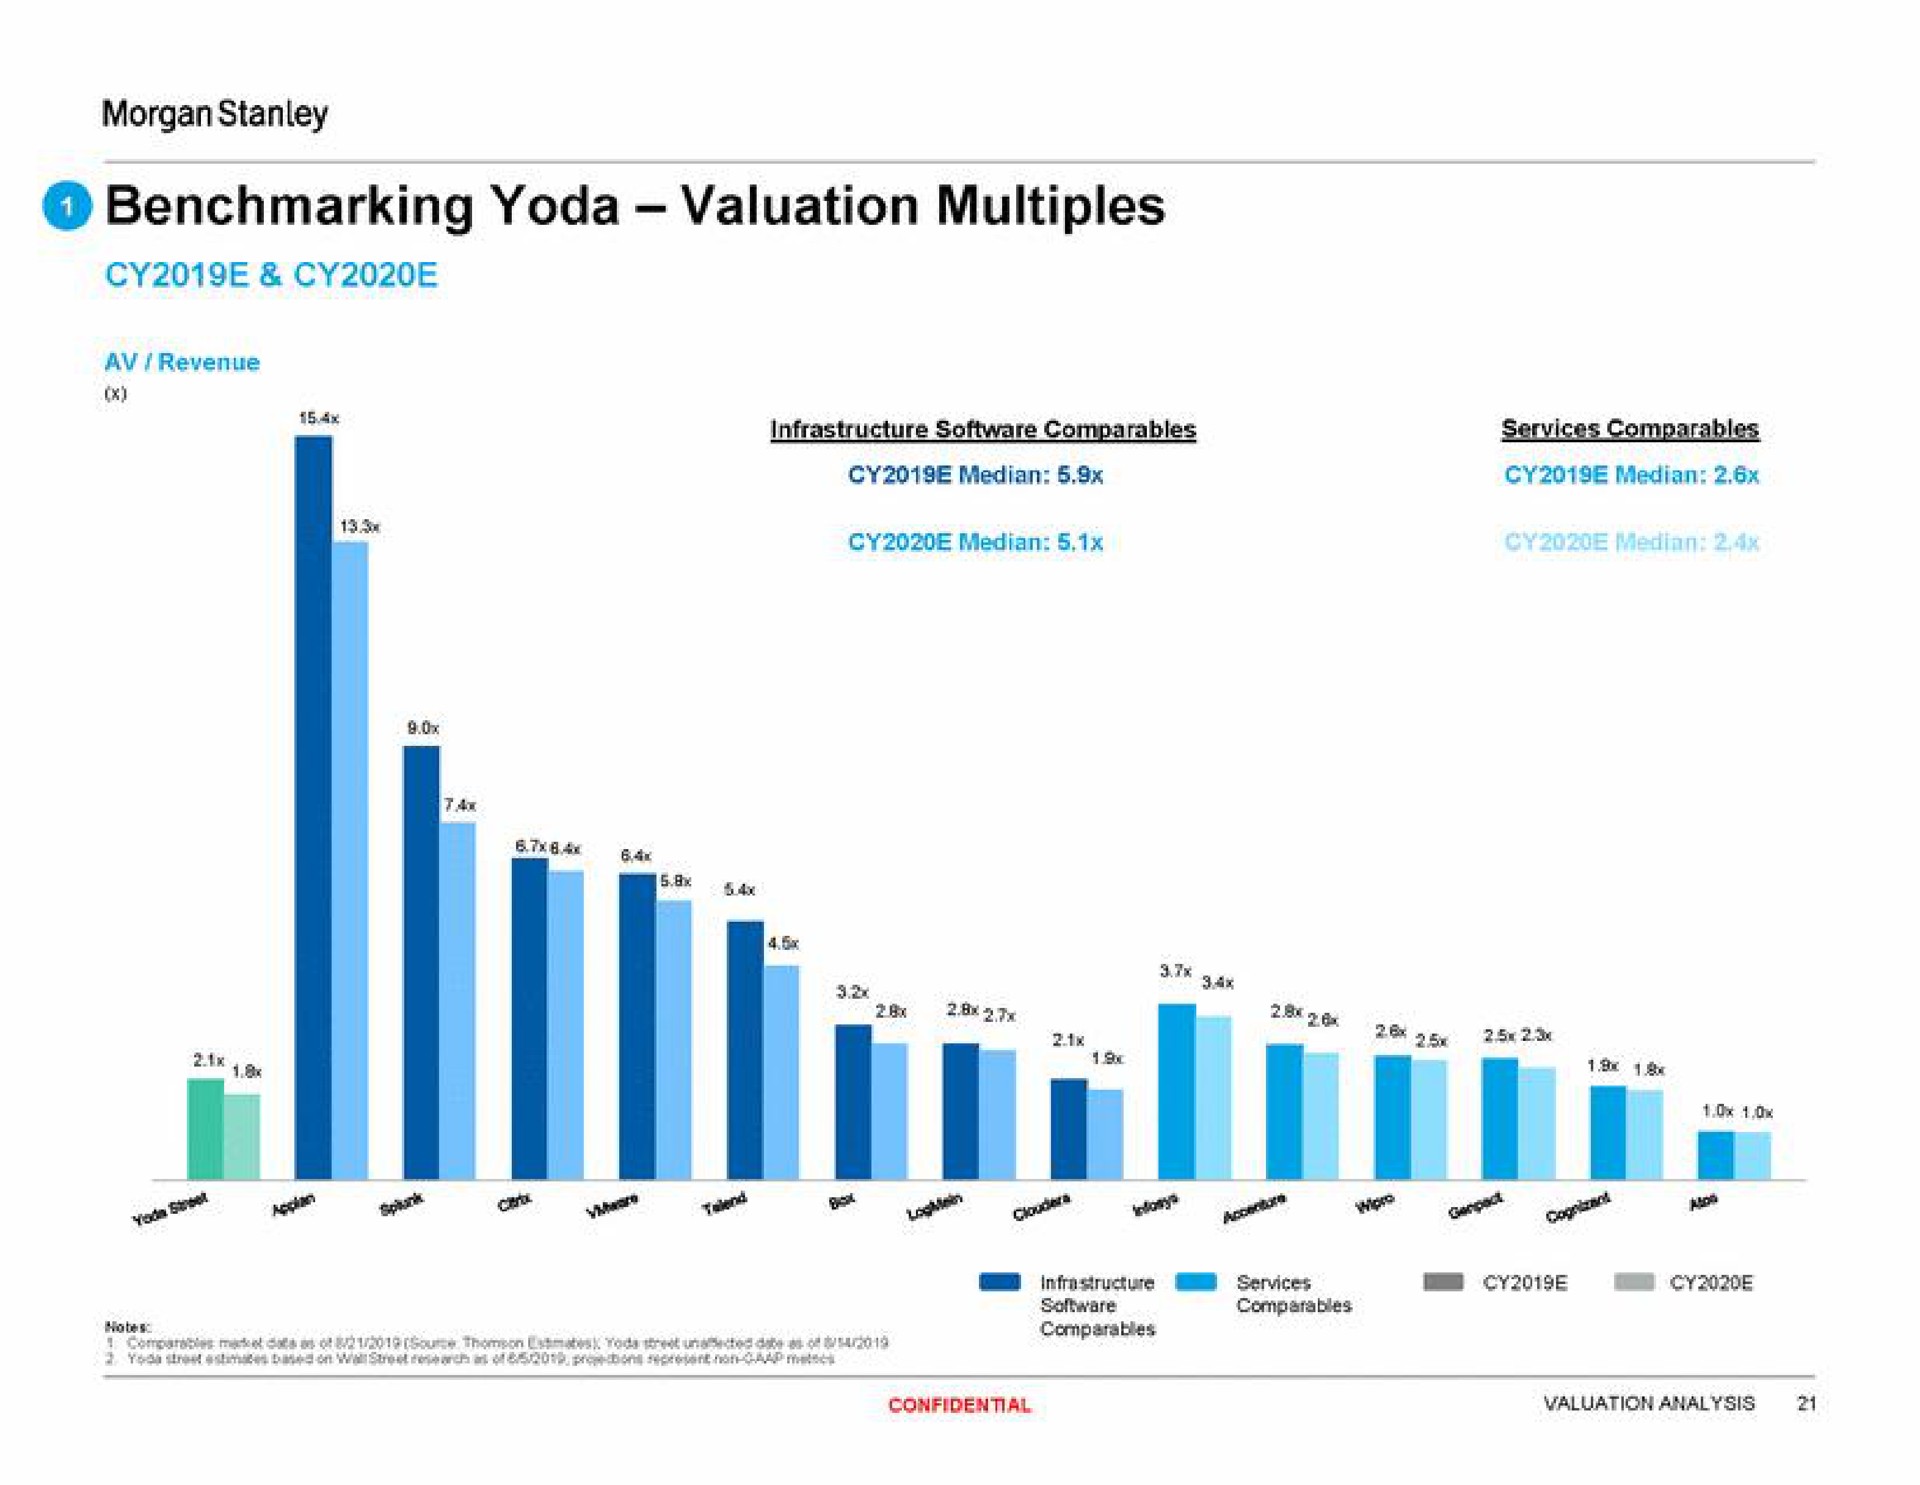 a valuation multiples | Morgan Stanley